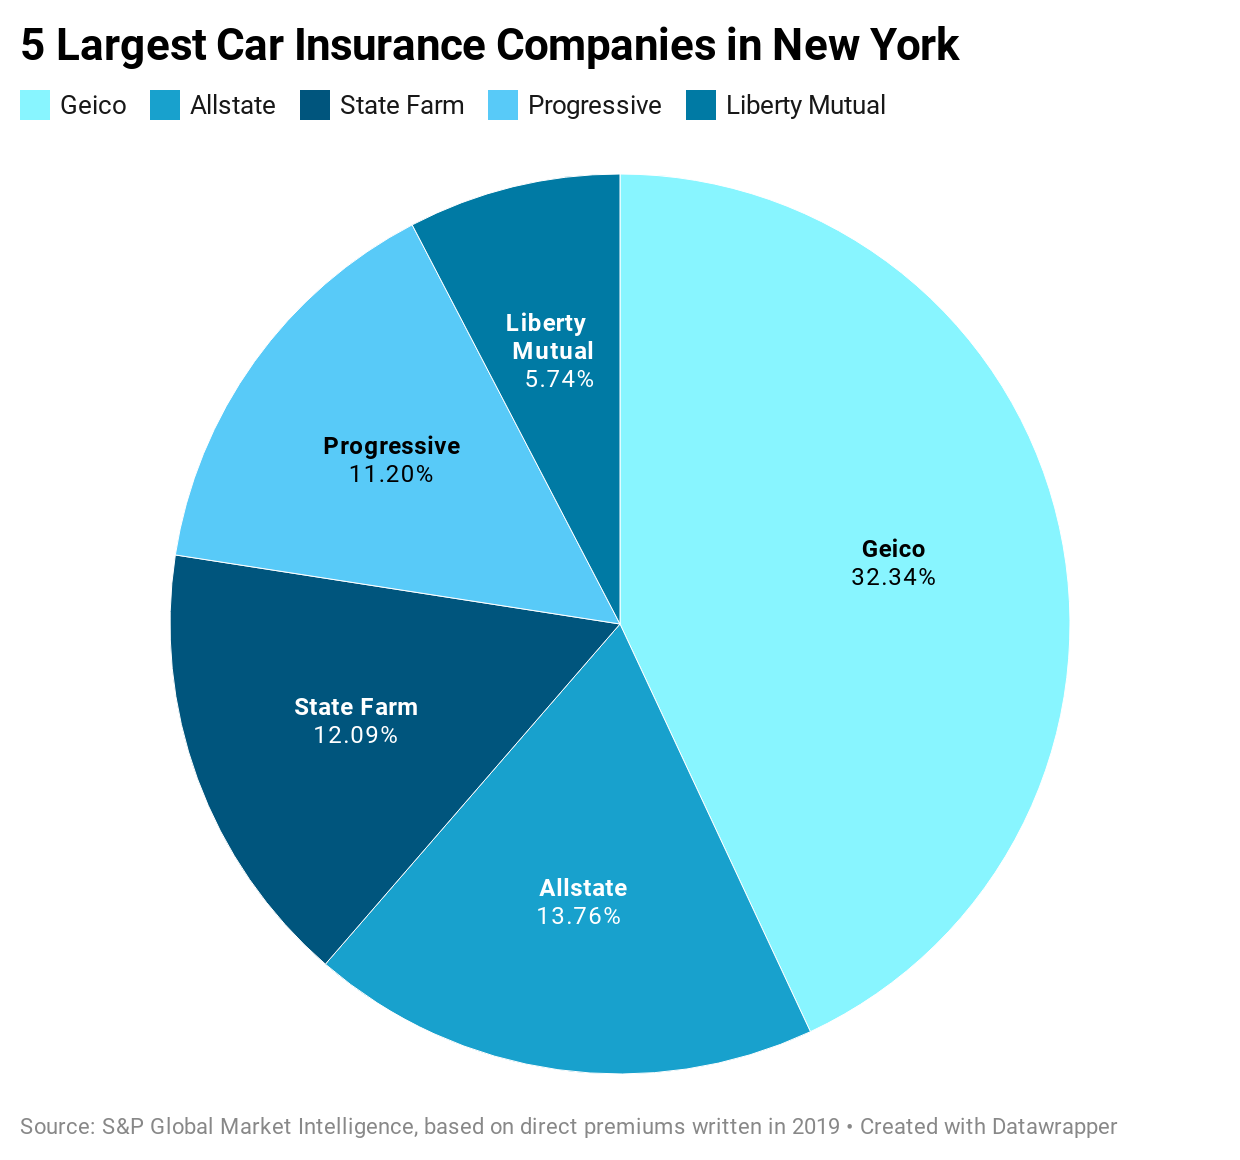 What insurance company has the most policy holders?